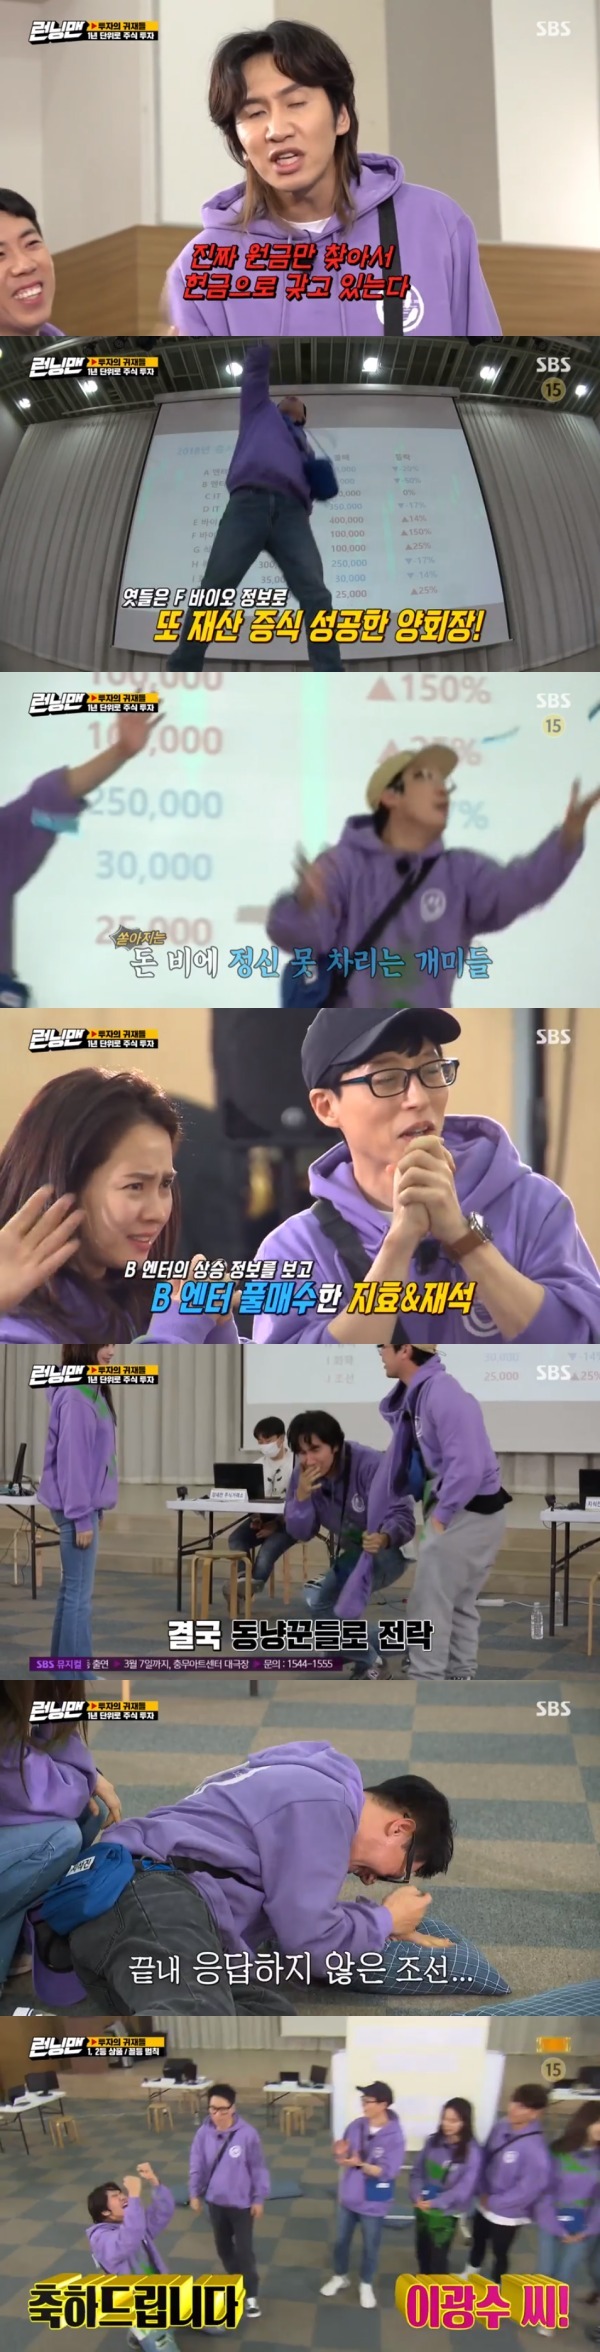 Seoul = = Ji Suk-jin won the penalty for the sixth consecutive week.On the 28th, SBS Running Man was held at the running simulated stock investment competition.On this day, Yoo Jae-Suk heard information from Lee Kwang-soo related to fine dust and all-in to I chemistry.Ji Suk-jin bought F Vaio, saying I remember 2017 is Vaio; Kim Jong-kook invested in G food and Song Ji-hyo in J shipbuilding.The deal closed in 2016 and everyone waited nervously for results: F Vaio G Food I Chemistry all hit the upper end; Ji Suk-jin evenly invested in rising stocks.Yoo Jae-Suk also had a high return; Haha also had a Vaio intensive investment; Jeon So-min and Kim Jong-kook also cheered.Song Ji-hyo and Lee Kwang-soo also recorded profits, but compared to others, they could not laugh because they were only a penny.Song Ji-hyos penalty was likely with three years left, and Yang Se-chan Ji Suk-jin Kim Jong-kook was the top.In particular, Yang Se-chan started with a principal of 500,000 won and increased to 86 million won.Yang Se-chan bought information with money instead of points; members who gained first-stage information on I chemistry, where international oil prices skyrocketed, invested in anticipation that I chemical stock prices would rise.Lee Kwang-soo asked Yang Se-chan to borrow money; Yang Se-chan asked him to show him the mosquito dance in exchange for the money.After a brief contemplation, Lee Kwang-soo abandoned his pride for money; Yoo Jae-Suk decided to use F Vaio information to Song Ji-hyo and Gong Yoo.This is because Song Ji-hyo has previously lost money because of the fake information Yoo Jae-Suk informed him.Yoo Jae-Suk and Song Ji-hyo invested heavily in F Vaio; Yang Se-chan overheard this and bought F Vaio.Yang Se-chan promised to sow a bunch of money if the investment results were good; investments showed F Vaio surged 150 percent and I Chem fell slightly.Yang Se-chan sprayed the money into the air as promised; Yang Se-chan, who became the unmatched number one, teased Lee Kwang-soo with the money.Yang Se-chan decided to go to Gong Yoo with Lee Kwang-soo.Lee Kwang-soo promised to ask about J Joseon but failed to abandon the fuss and confirmed I chemistry.Ji Suk-jin said he would give Lee Kwang-soo 500,000 won if he gave J Chosun information.Lee Kwang-soo received 500,000 won and gave me fake information of the best of the dances.Jeon So-min was recommended for the event by the camera director, who said he was stocking among the staff; the camera director recommended C IT to Jeon So-min.Song Ji-hyo heard B-enter second-tier information; B-enter had a favorable share price rally; Yoo Jae-Suk and Song Ji-hyo focused their entire fortune on B-enter.Ji Suk-jin, who had been watching J Chosuns trend from the beginning, bought J shipbuilding; the B-enter, which invested with Yoo Jae-Suk and Song Ji-hyo, rose 50 percent.The two held hands tight and cheered; Yang Se-chan, who retained F Vaio, also made the investment.Yoo Jae-Suk hit Yang Se-chan by about 16 million won; Song Ji-hyo was out of last place thanks to Yoo Jae-Suk.Thanks to my brother, Song Ji-hyo said.In the last year, all IT stocks rose, while shipbuilding stocks invested by Ji Suk-jin were halved.Ji Suk-jin was frustrated to see half of his property fly away in an instant; Haha said, Ji Suk-jin is like that, so its like real reality.Kim Jong-kook said, Its the same as reality: Song Ji-hyo, who had even recorded a negative, met a mentor named Yoo Jae-Suk and finished third.The first and second places were split by 10 million won; Yang Se-chan won first with 110 million won; Yoo Jae-Suk was second.It was Lee Kwang-soo who managed to avoid penalties; Ji Suk-jin was put in the last place; Lee Kwang-soo said: Its a record.Its a six-week straight penalty, said Ji Suk-jins penalty, which was to load rice, the first and second prize, into the cars of Yang Se-chan and Yoo Jae-Suk.